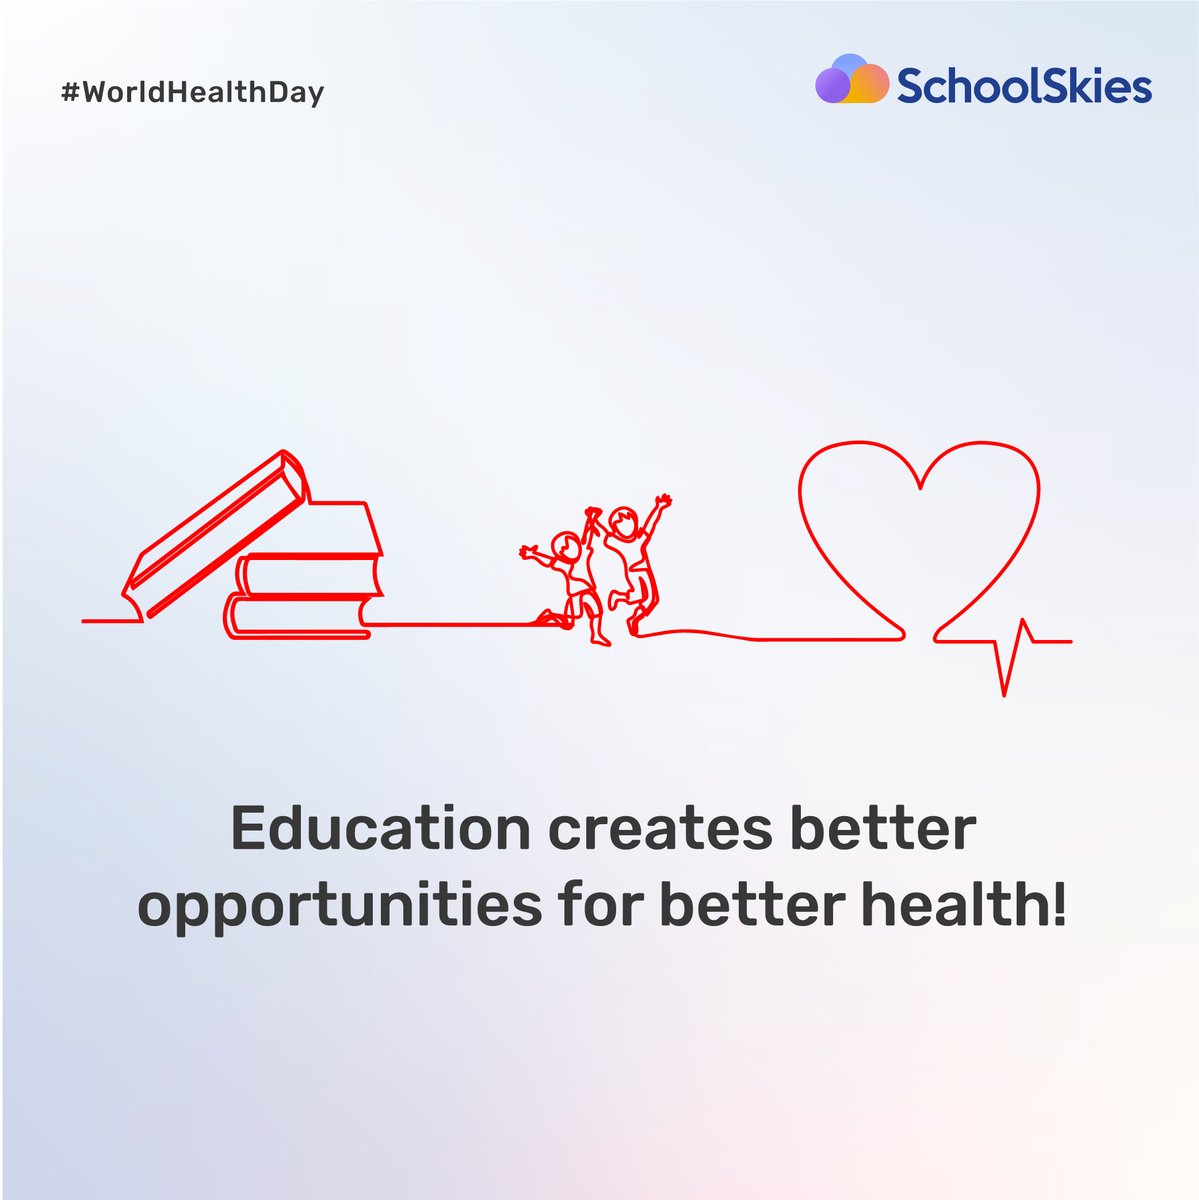 Access to quality education empowers everyone with the knowledge to make informed health decisions. Let’s invest in education to create a healthier future.

Happy World Health Day!

#SchoolSkies #SchoolManagement #ERPSoftware #Efficiency #Innovation #WorldHealthDay